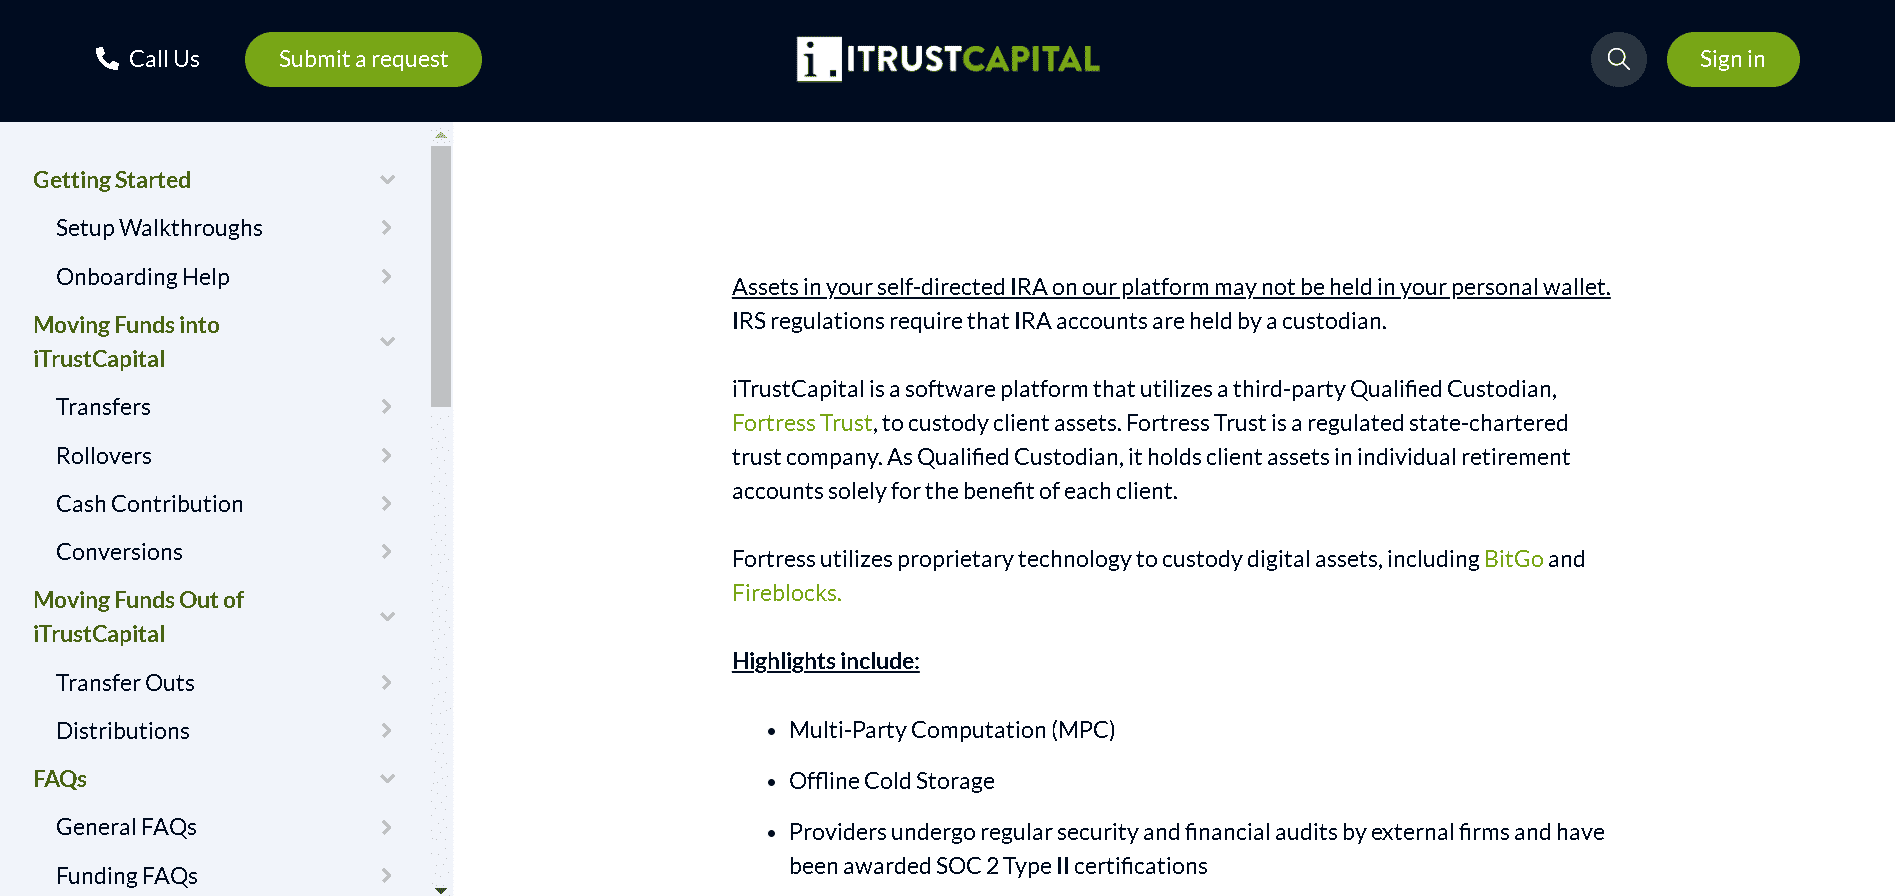 iTrustCapital works with legitimate, reputable and trustworthy custodial services.